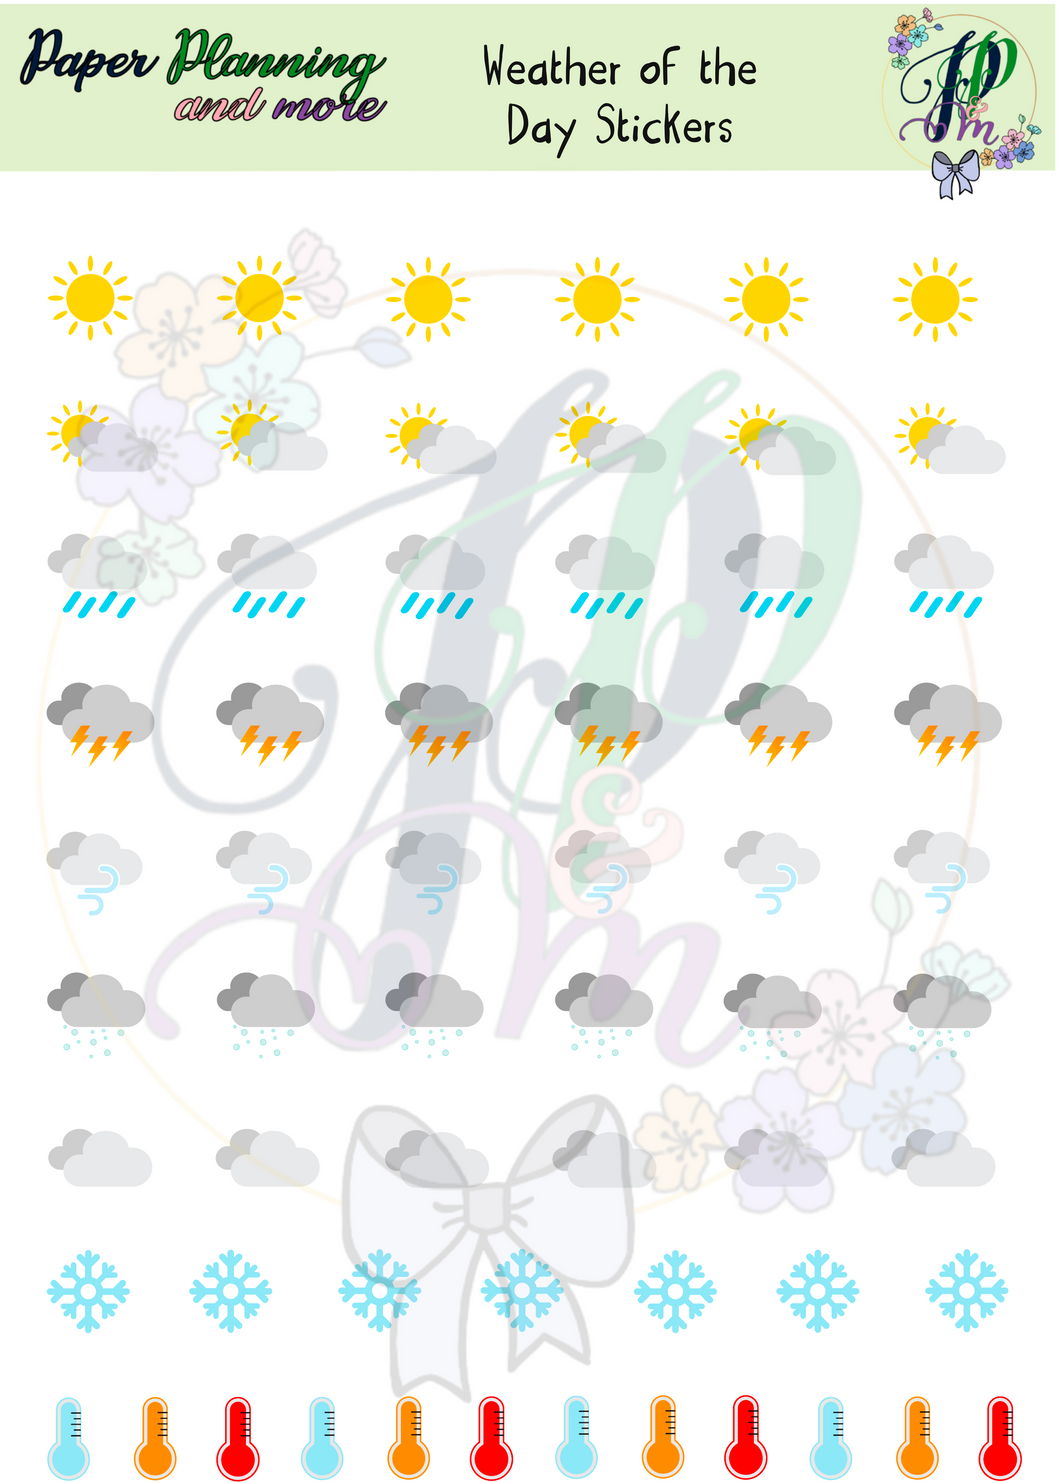 Weather of the Day Sticker Sheet